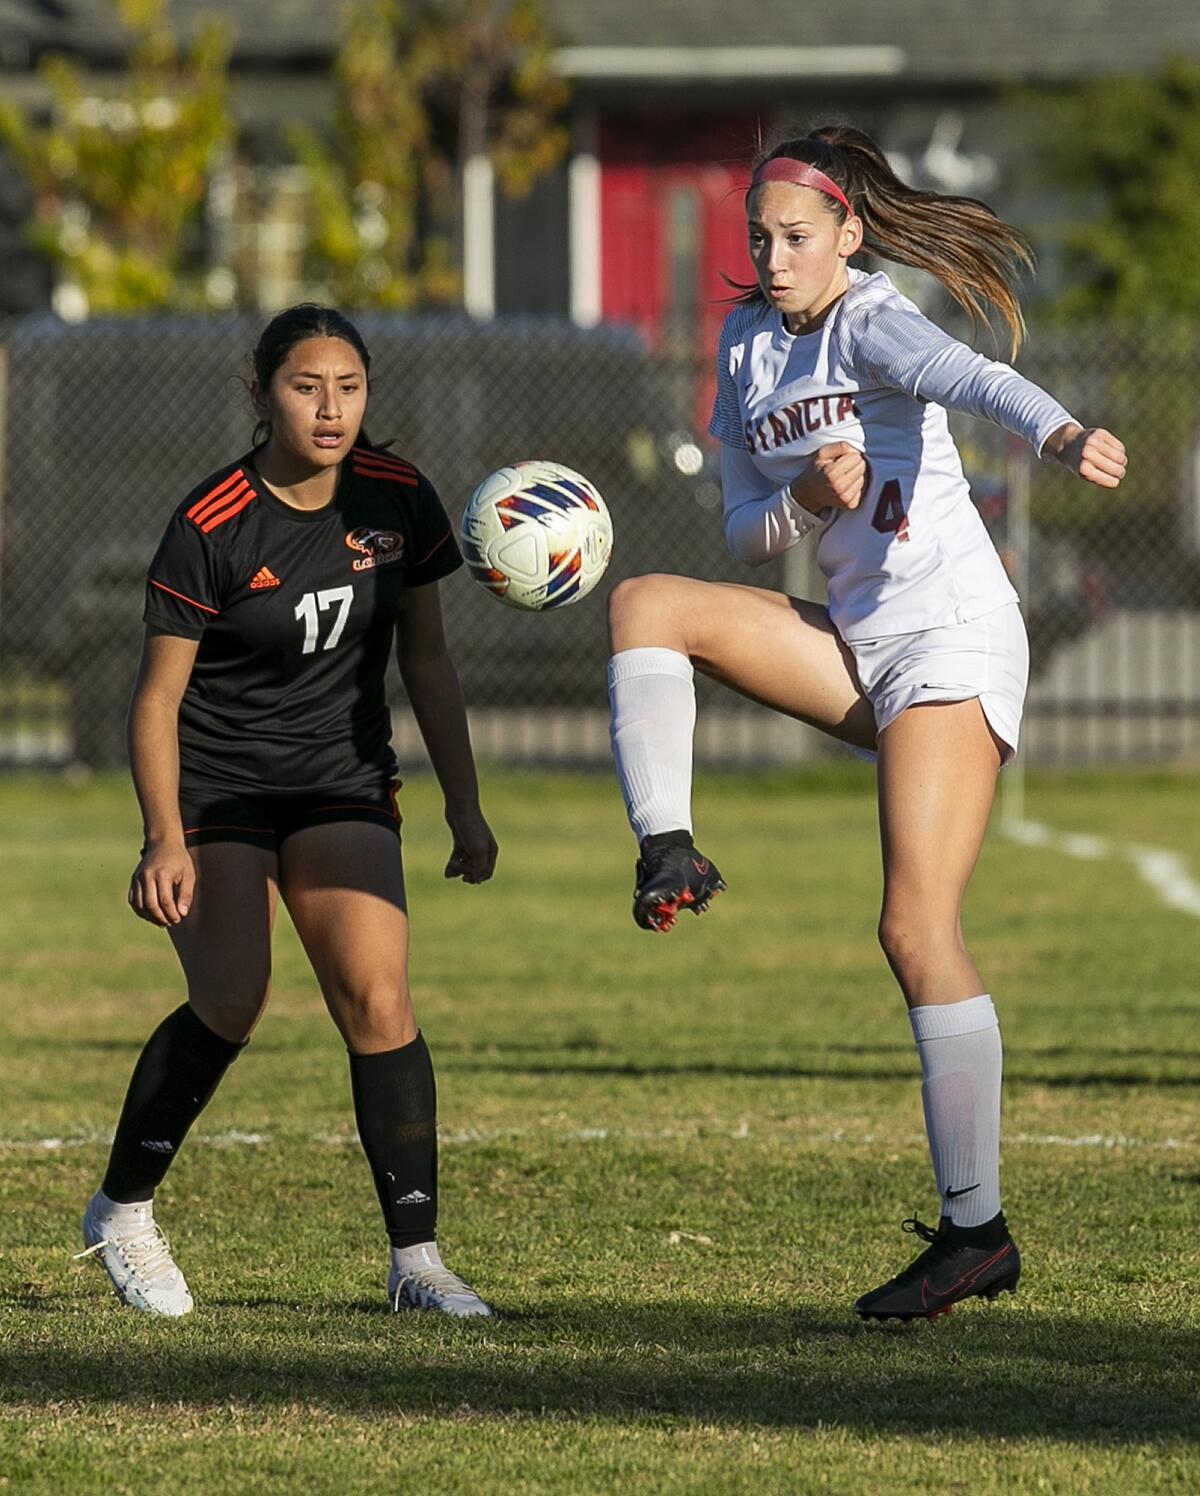 Estancia's Jana Akins handles a pass under pressure from Los Amigos' Isabel Piedra during a CIF Division 6 wildcard game.